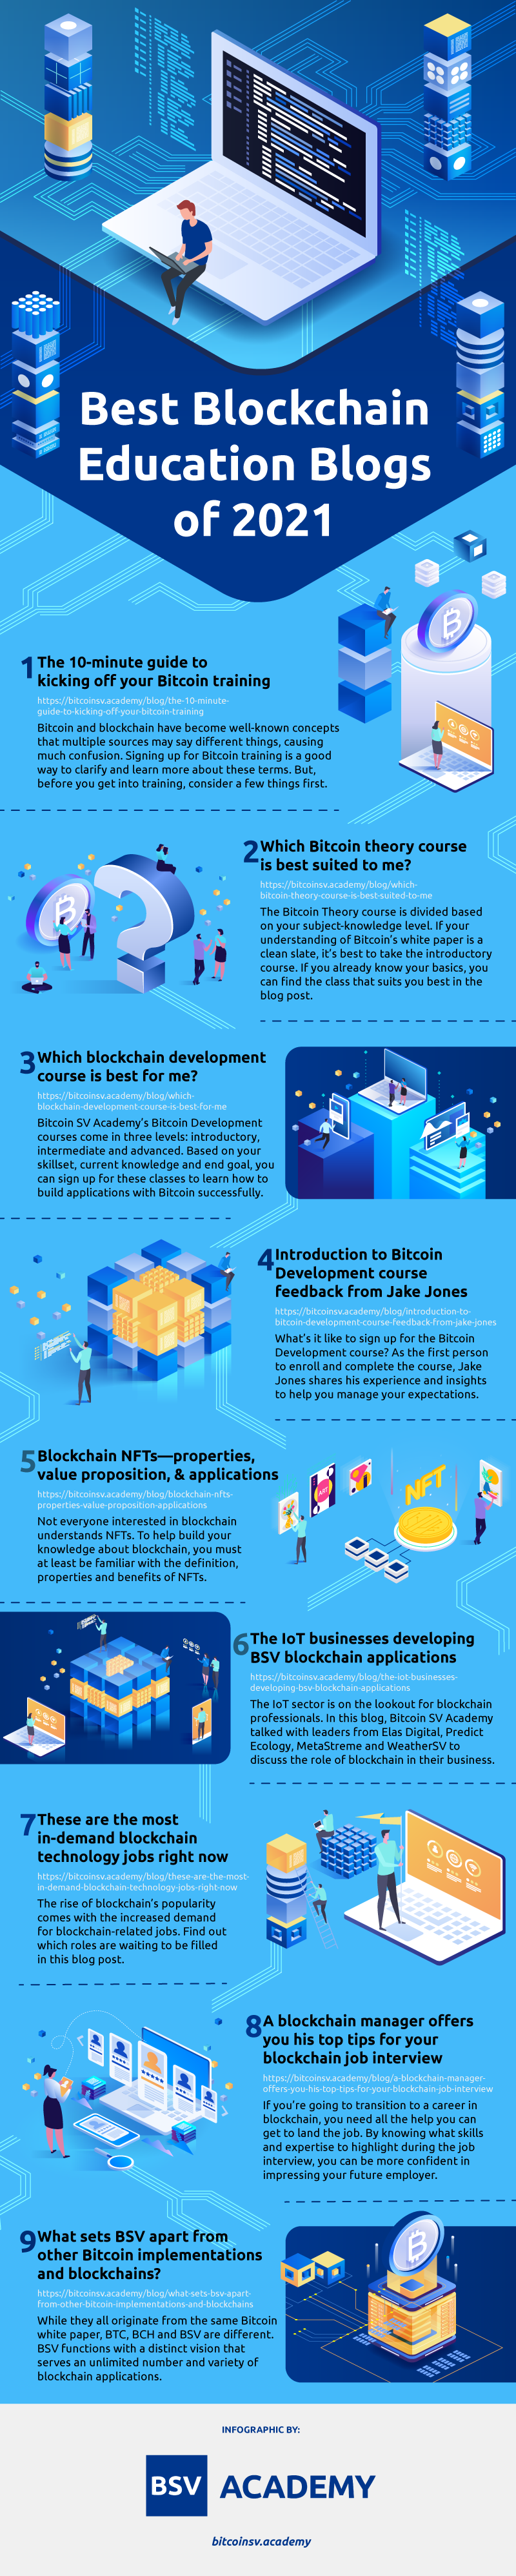 Infographic showing Best Blockchain Education Blogs of 2021